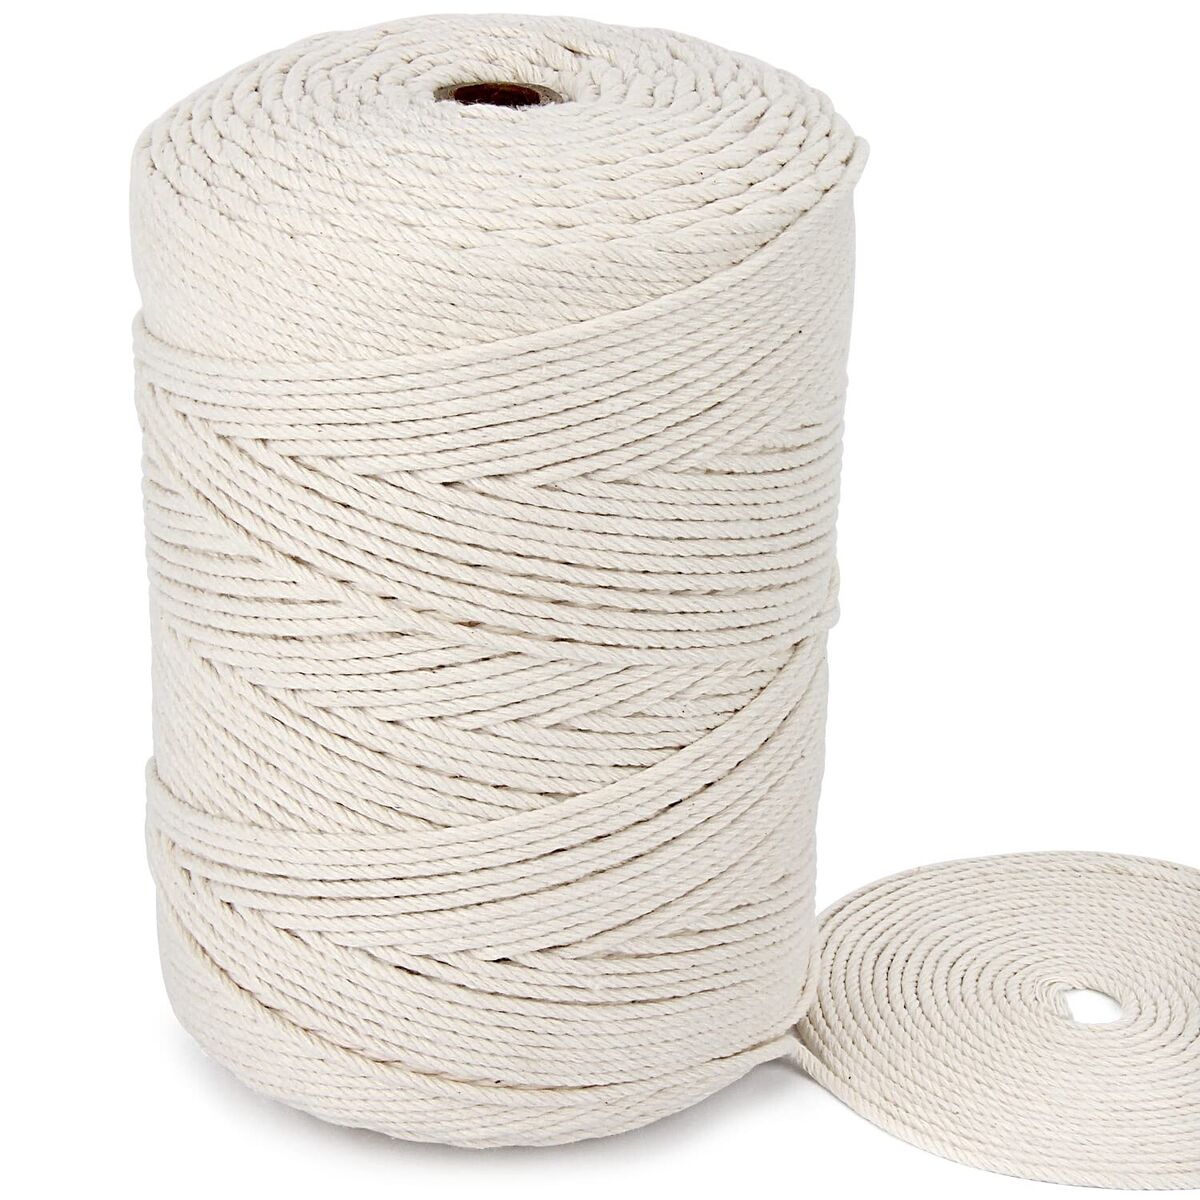 Blisstime Macrame Cord 3mm X 500 Yards Natural Cotton Macrame Rope 4 Strand  T